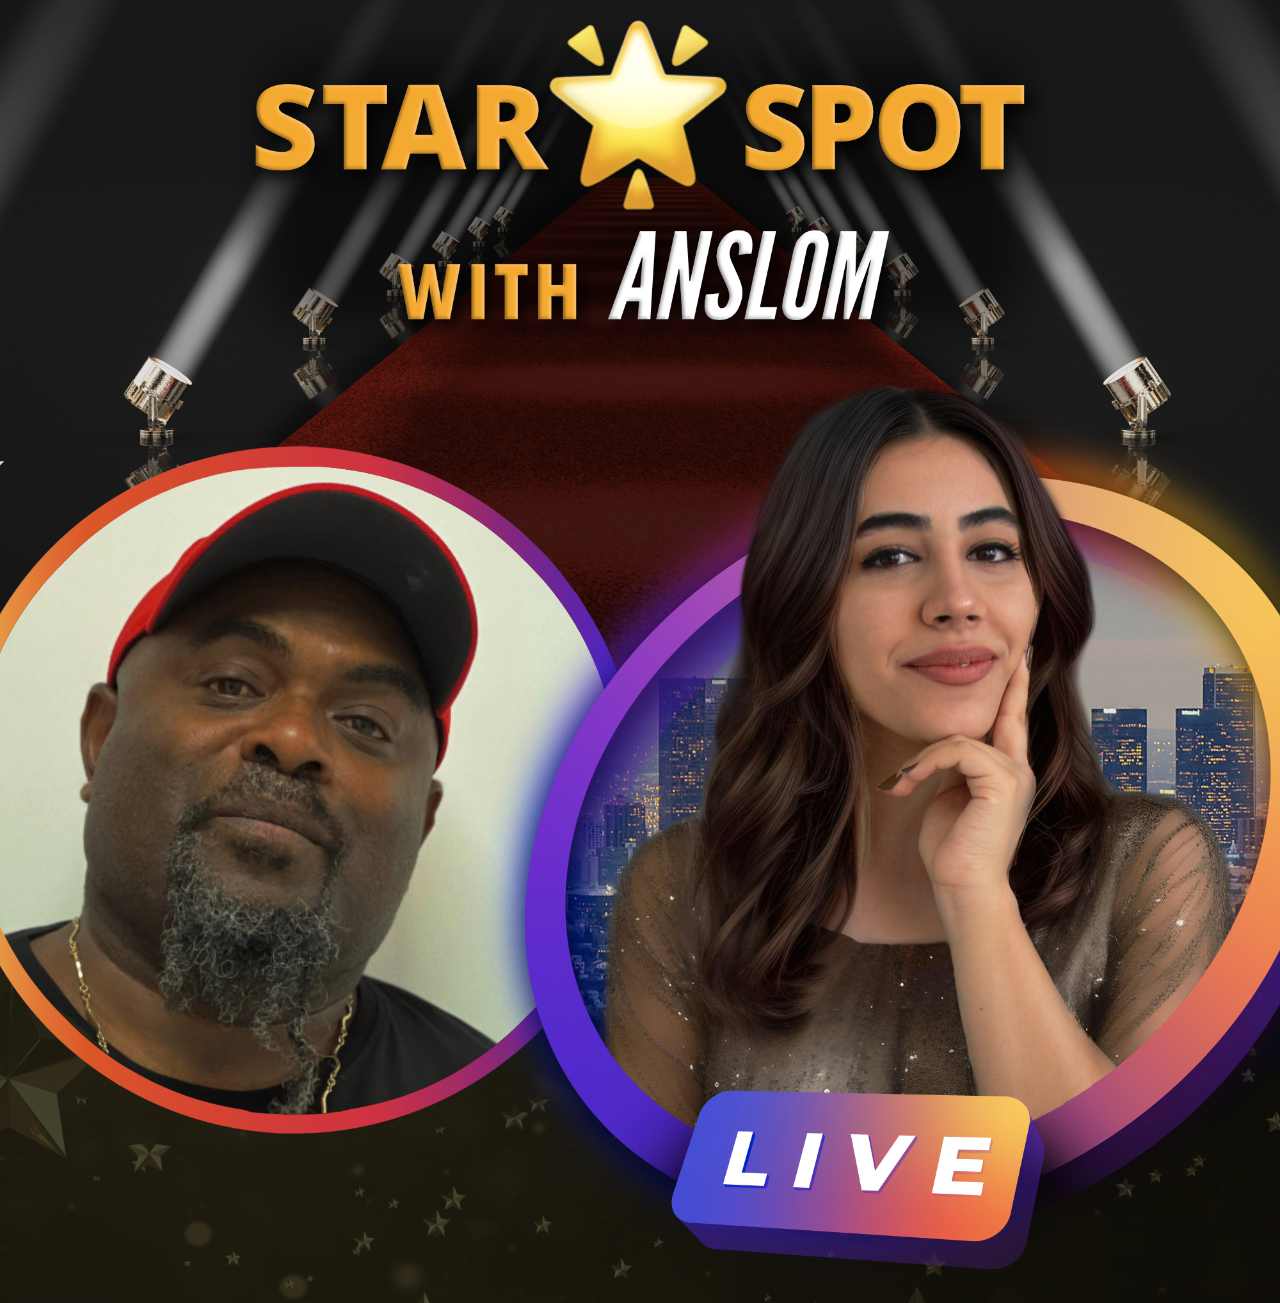 Promotional cover art of Star Spot with Anslom